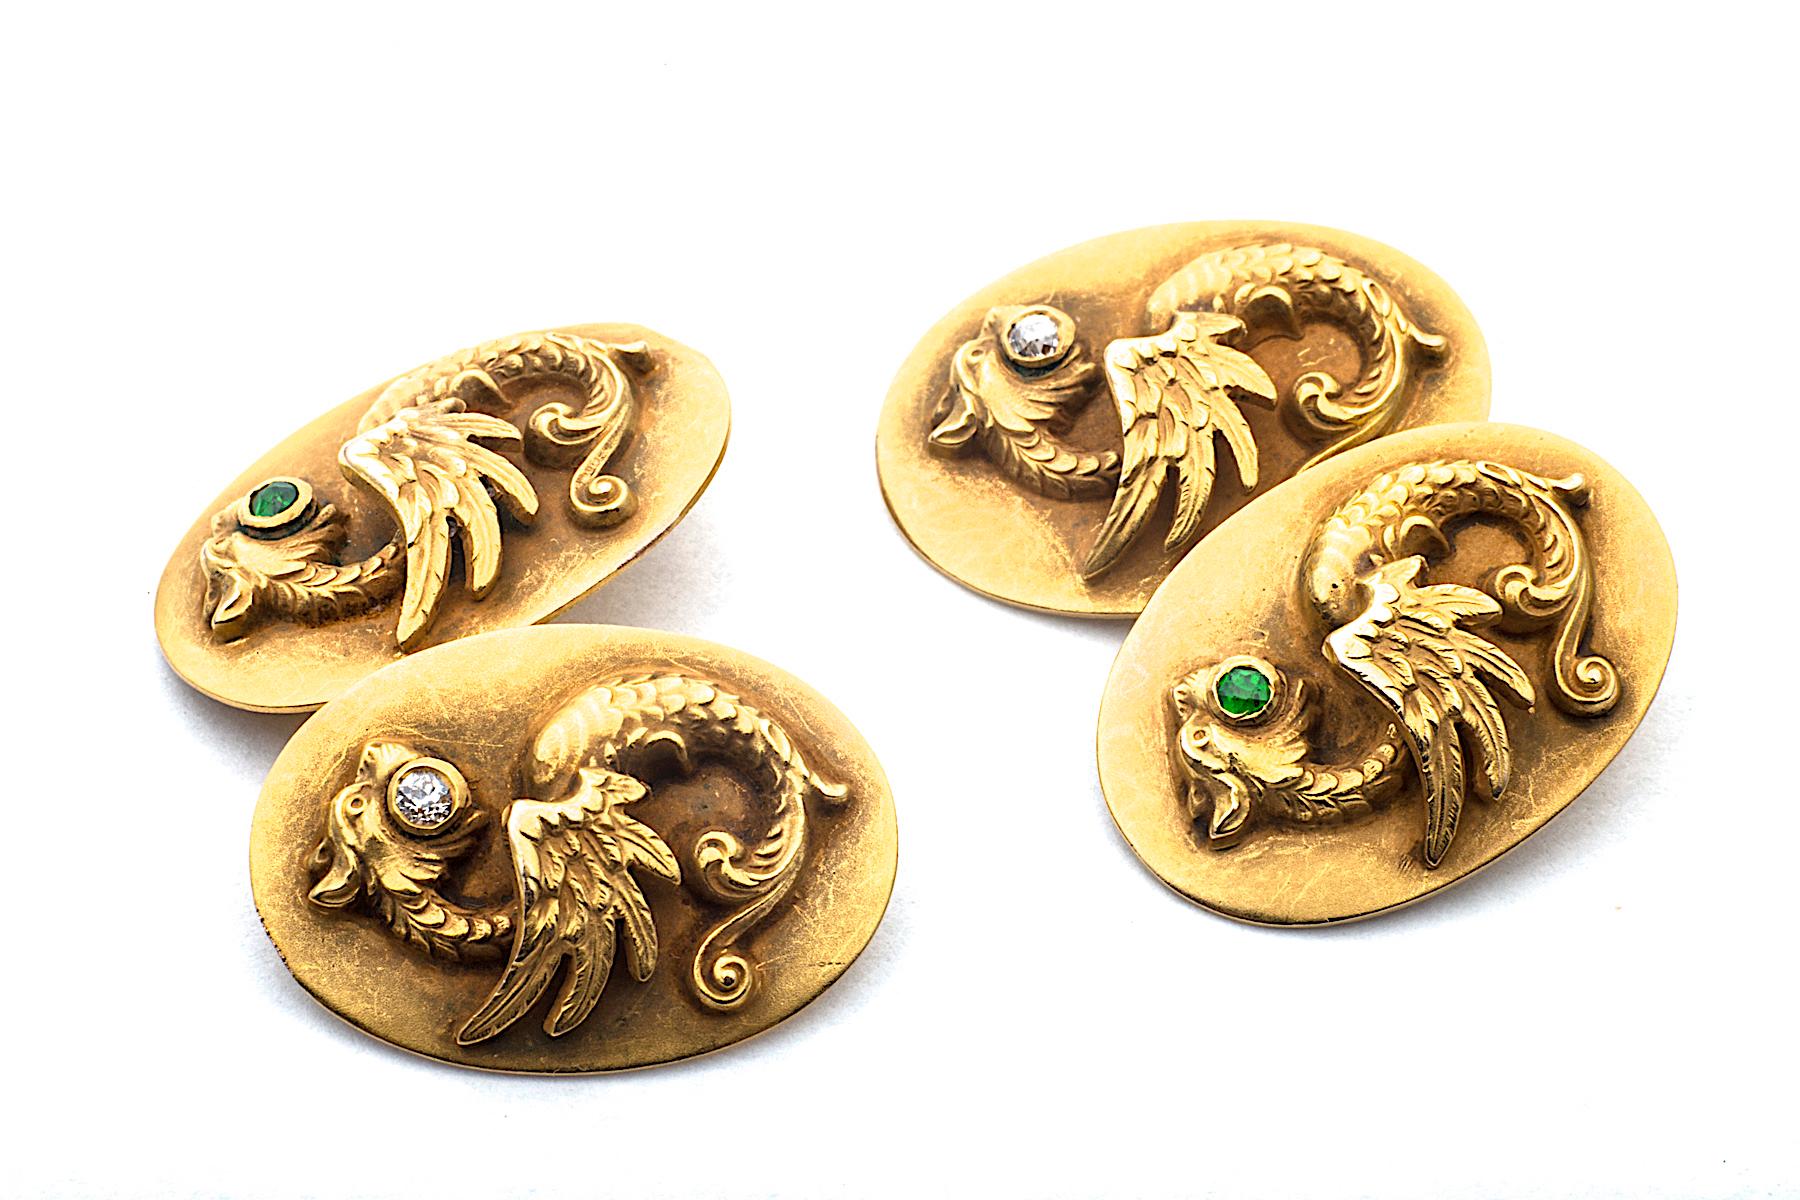 The mythical dragon is considered to be the king of beasts and represents strength, wisdom, luck, and unlimited potential.  And, these Art Deco 14 karat gold two dimensional dragon cufflinks will provide you with all the power you will ever need! 